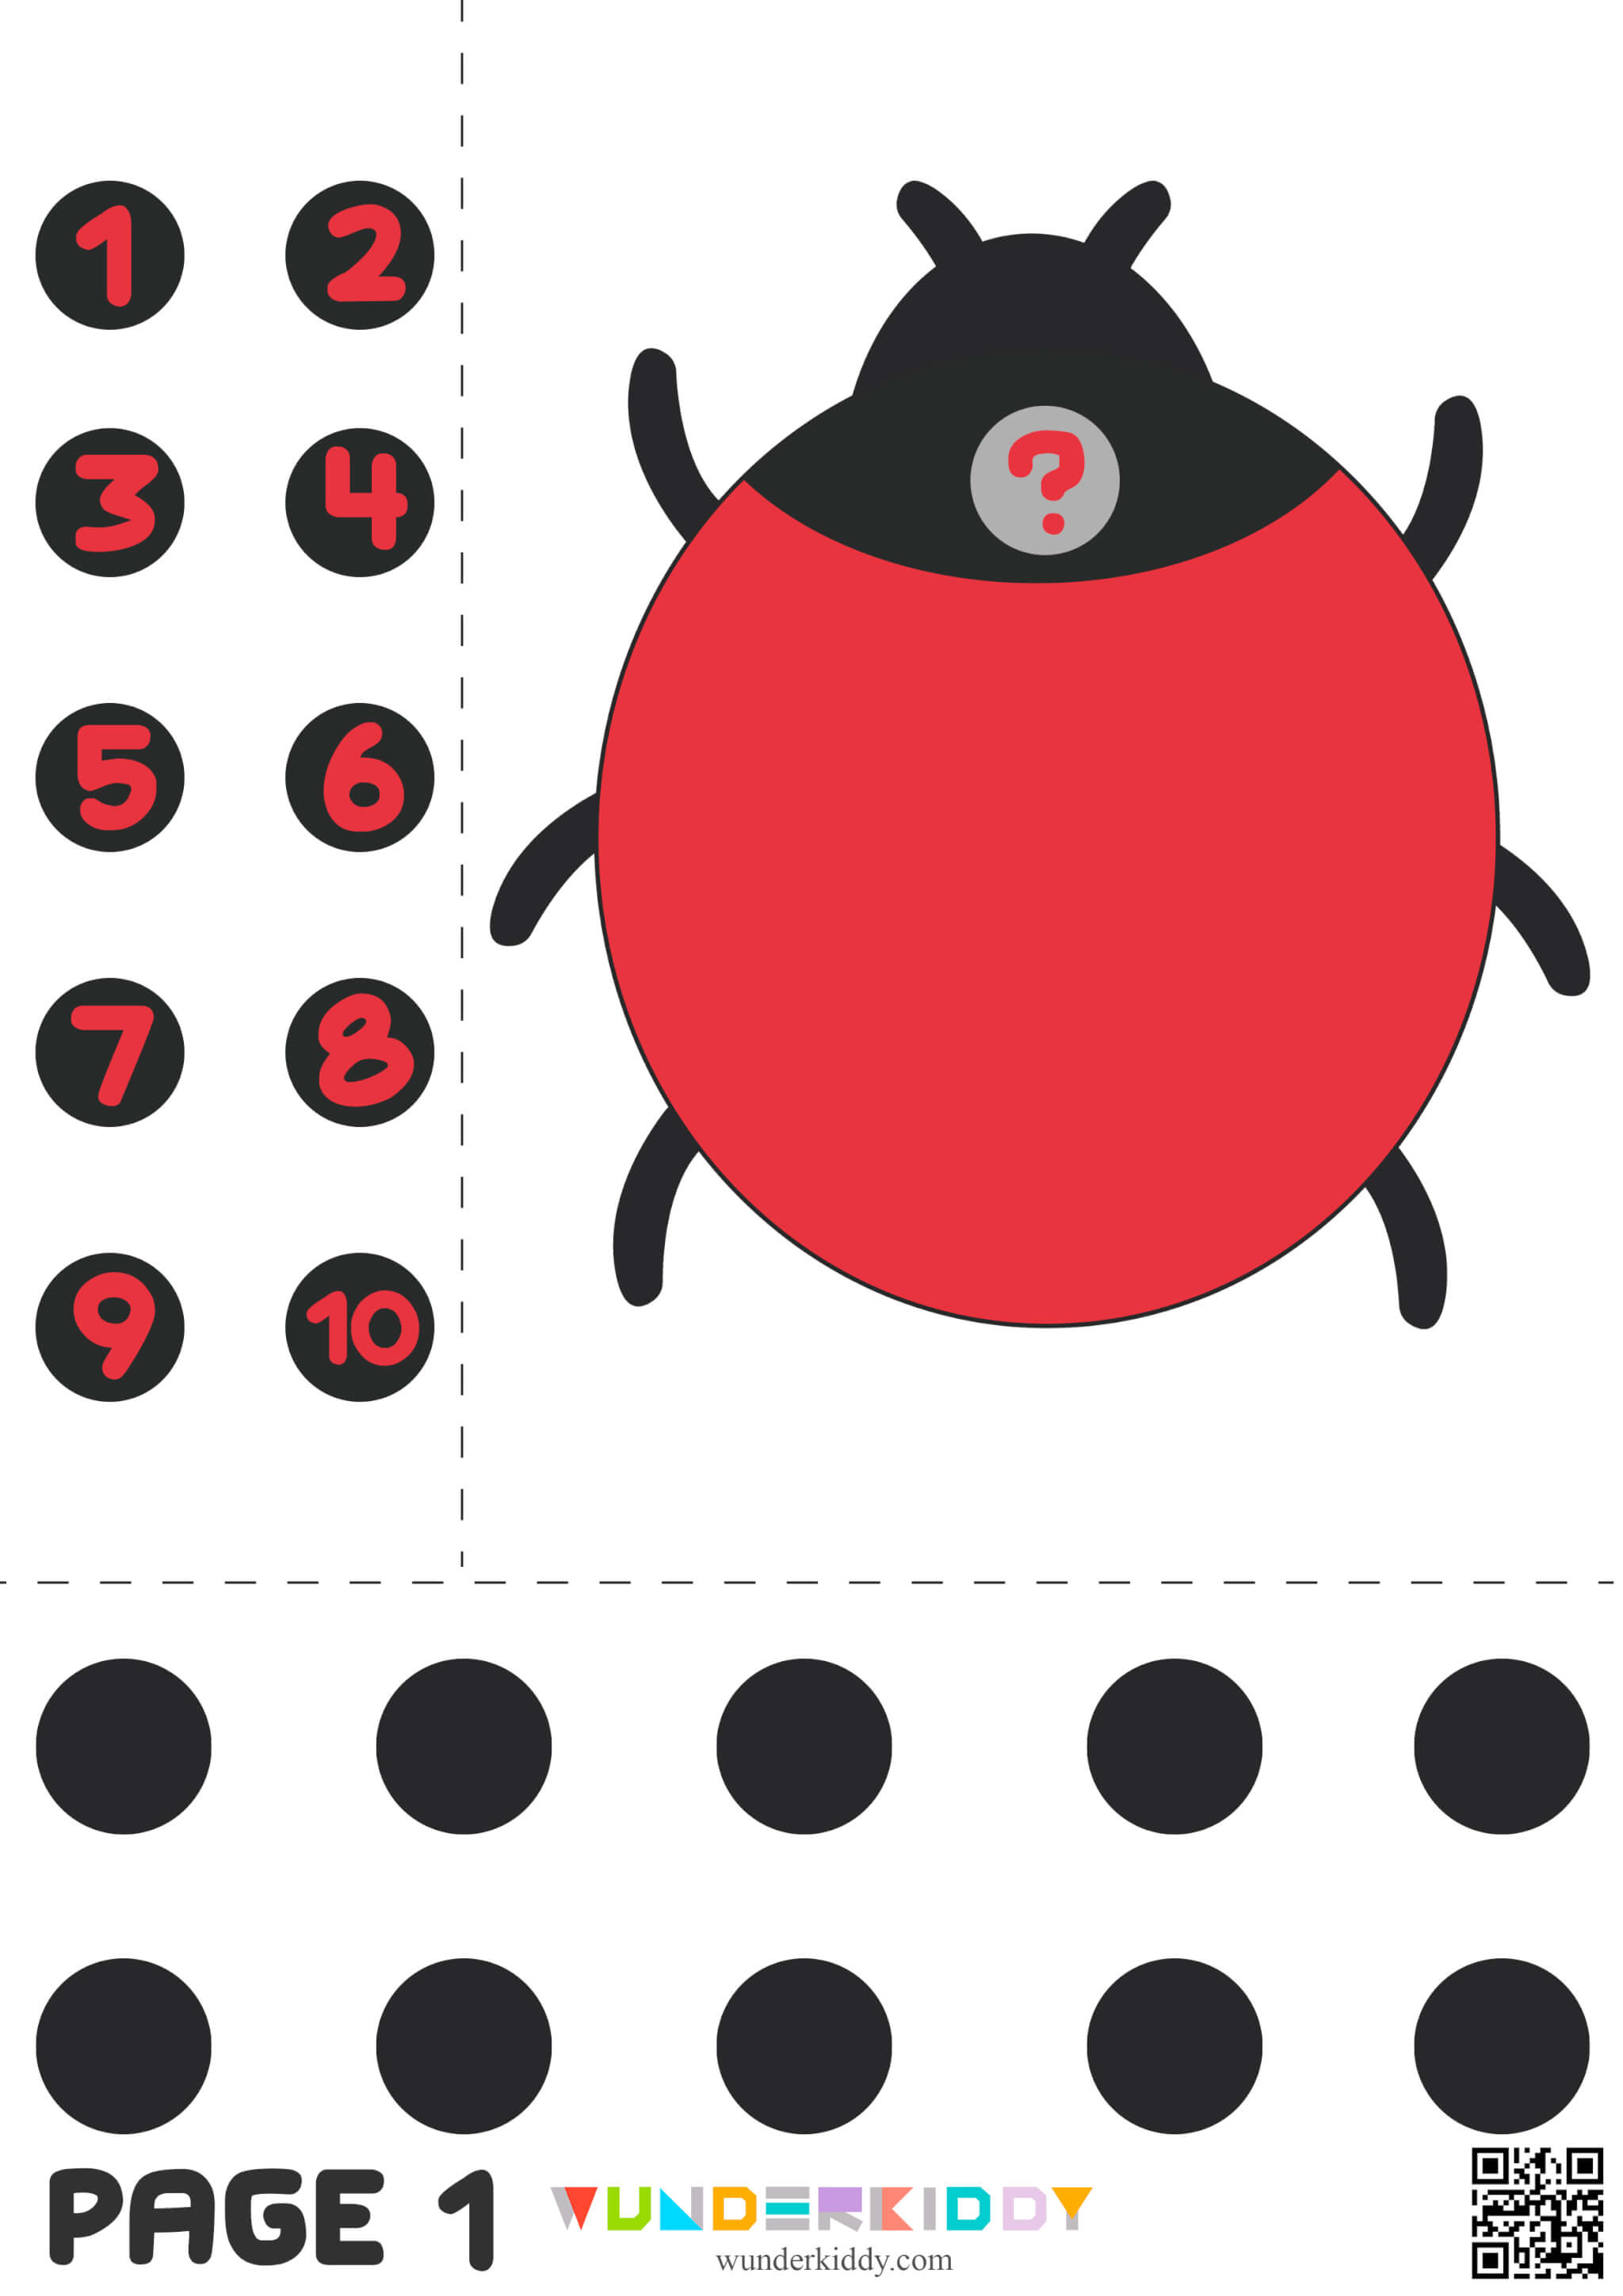 Ladybug Activity and Templates for Kids - Image 2